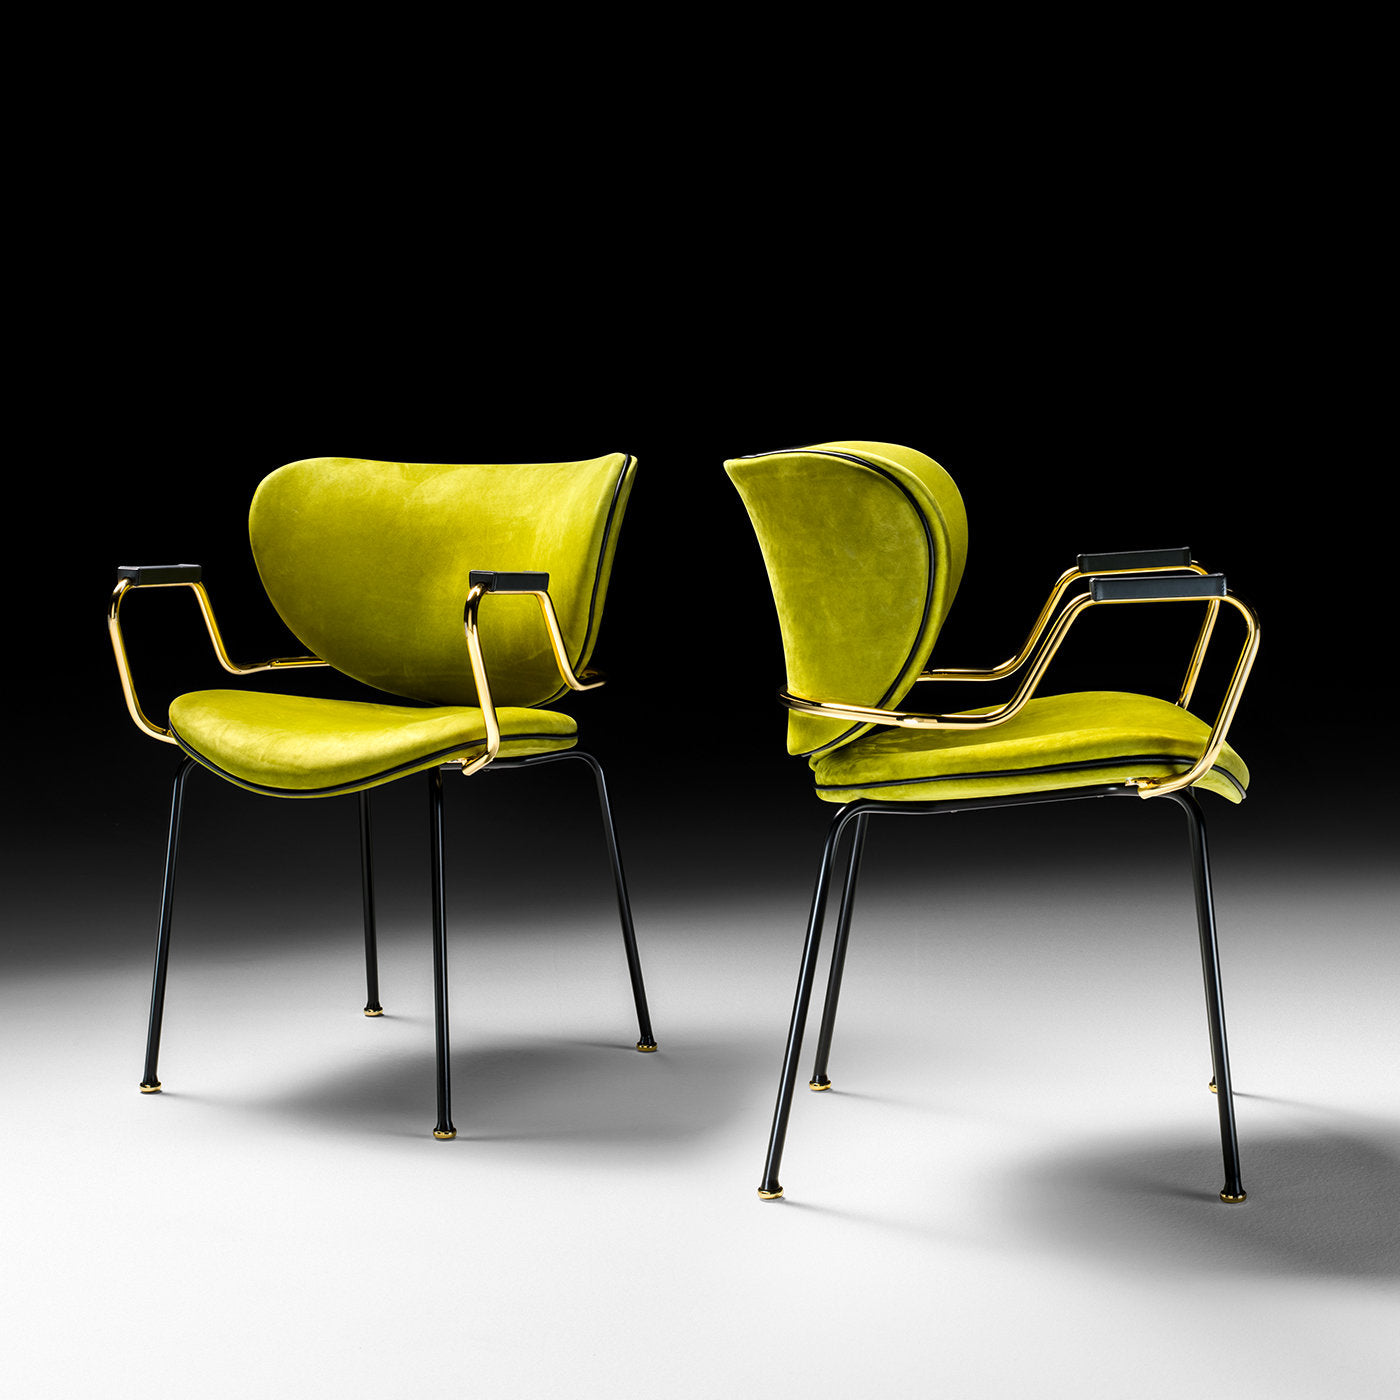 Kalida Chair with Armrests - Alternative view 1